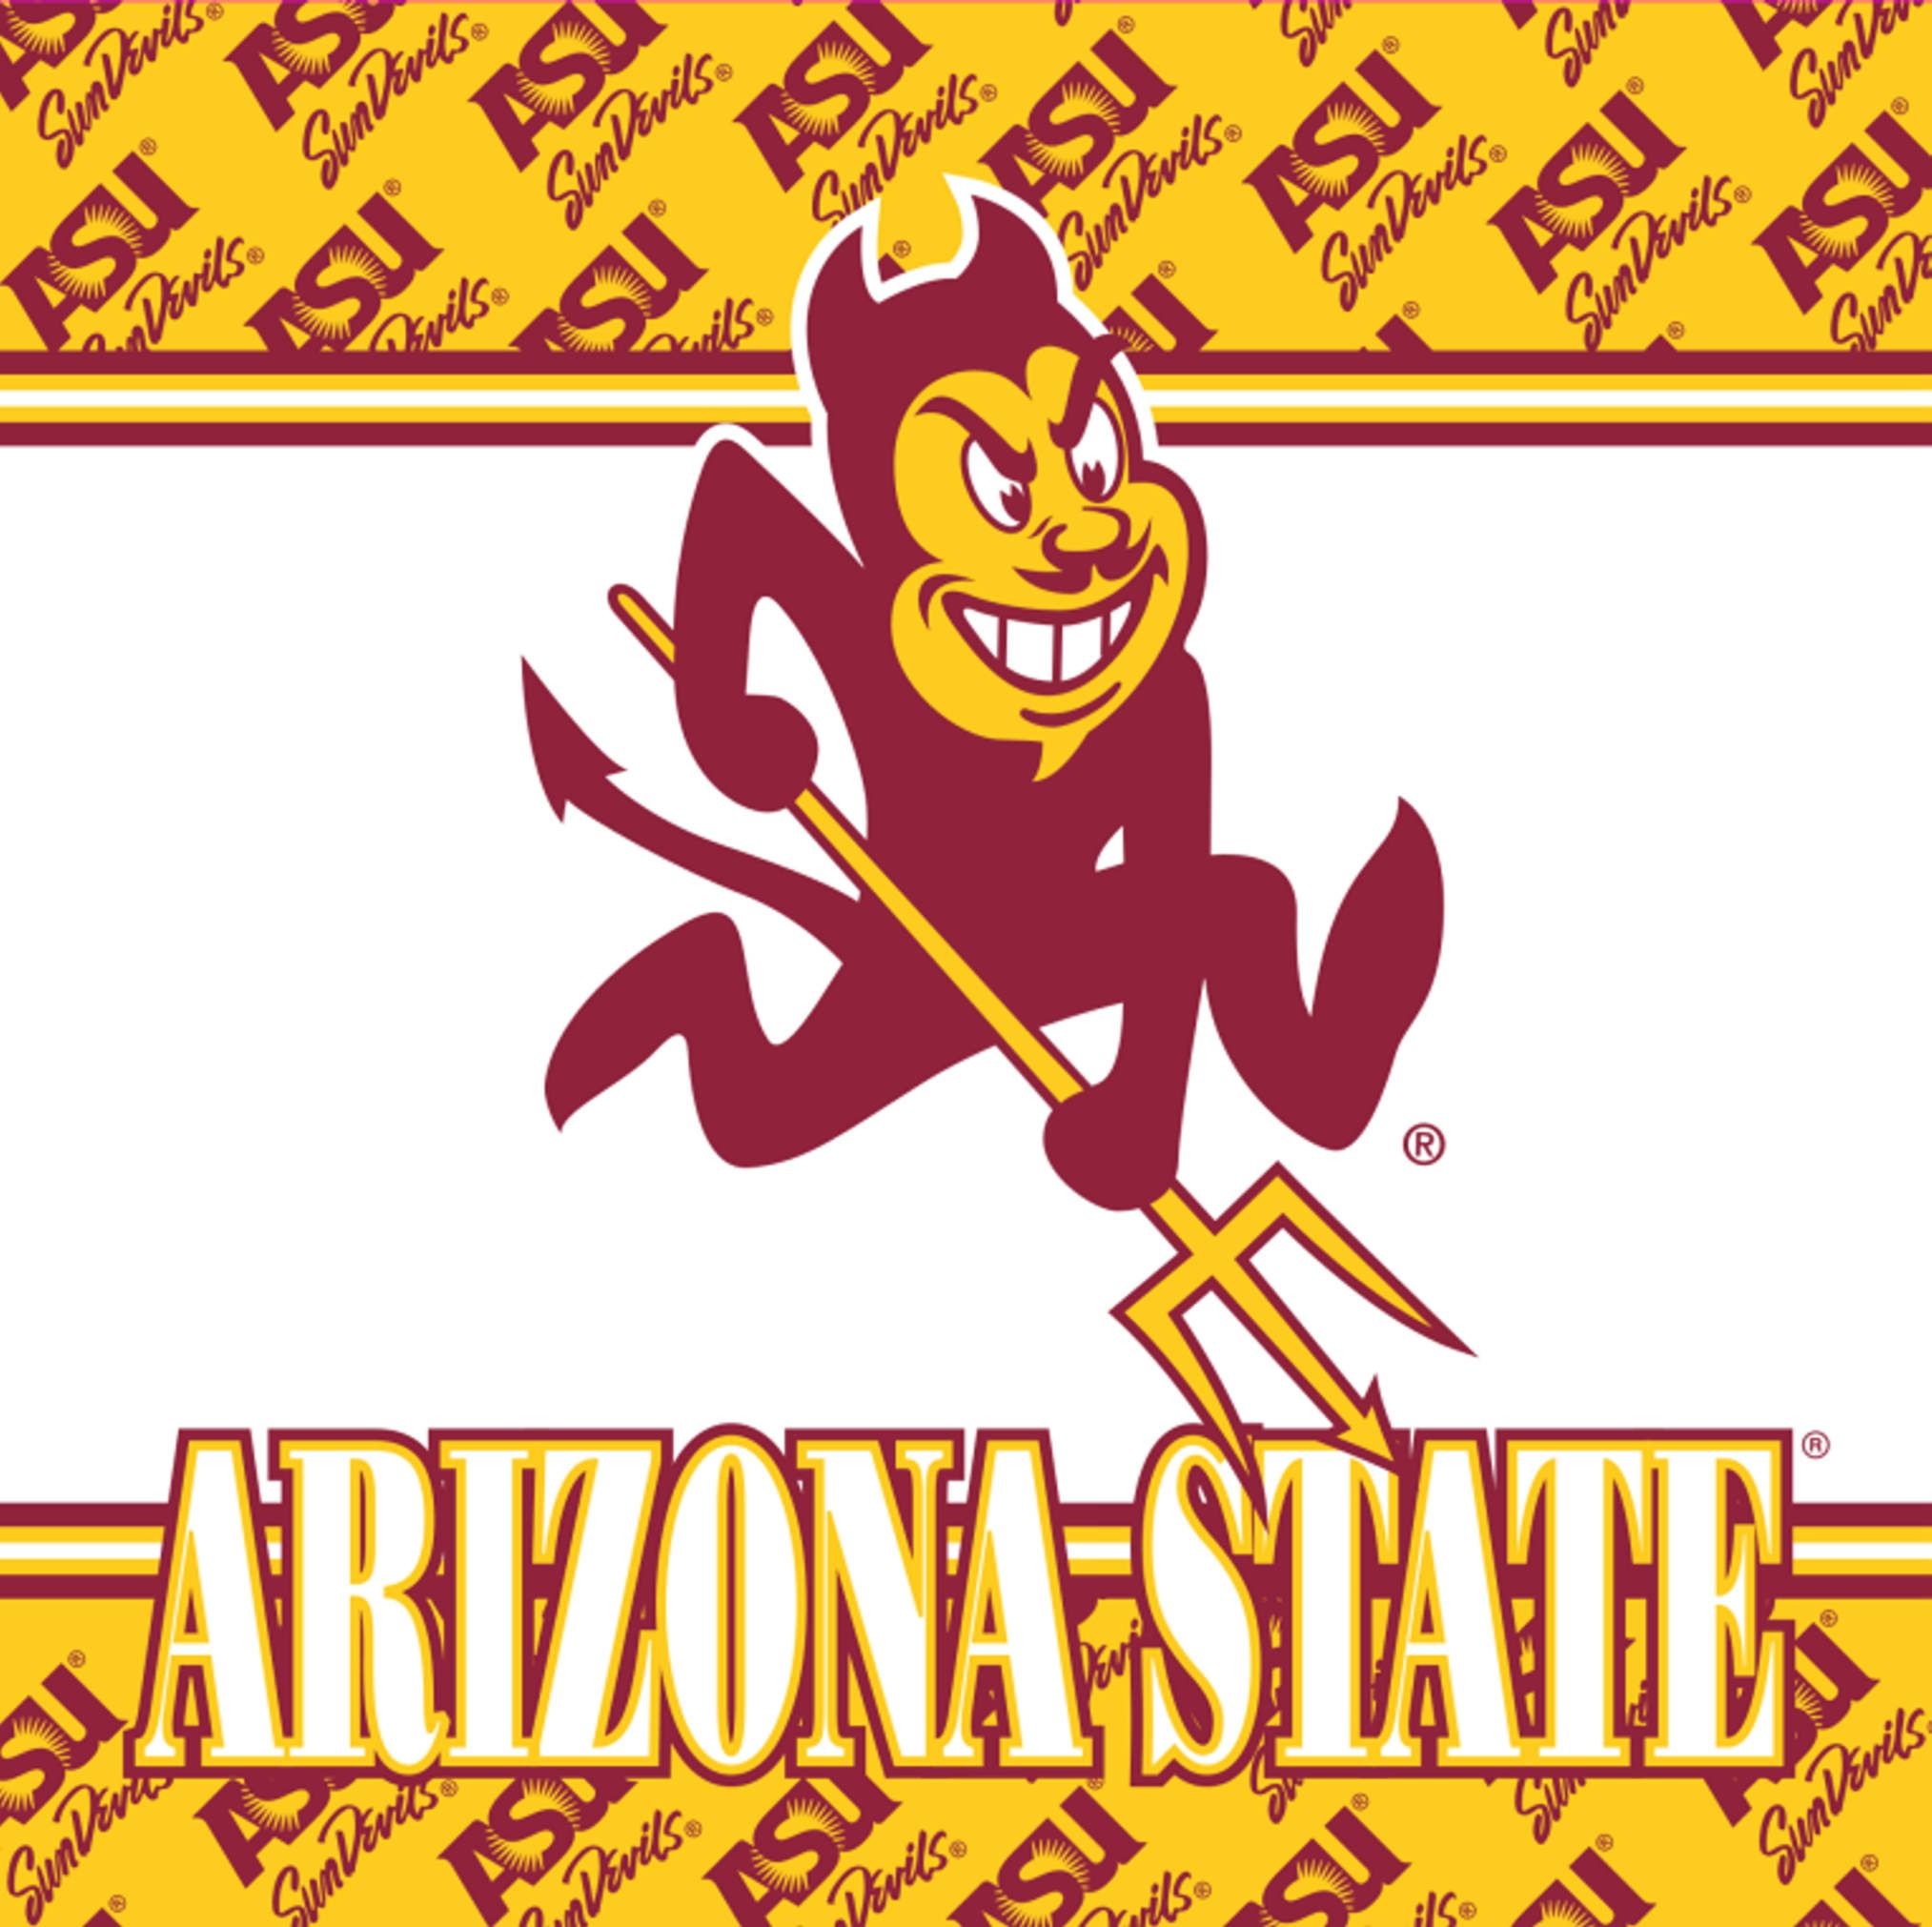 2027x2022 Sparky the Sun Devil is the official mascot of Arizona State University.  Sparky was designed by former Disney illustrator Bert Anthony. Go devils,  go!